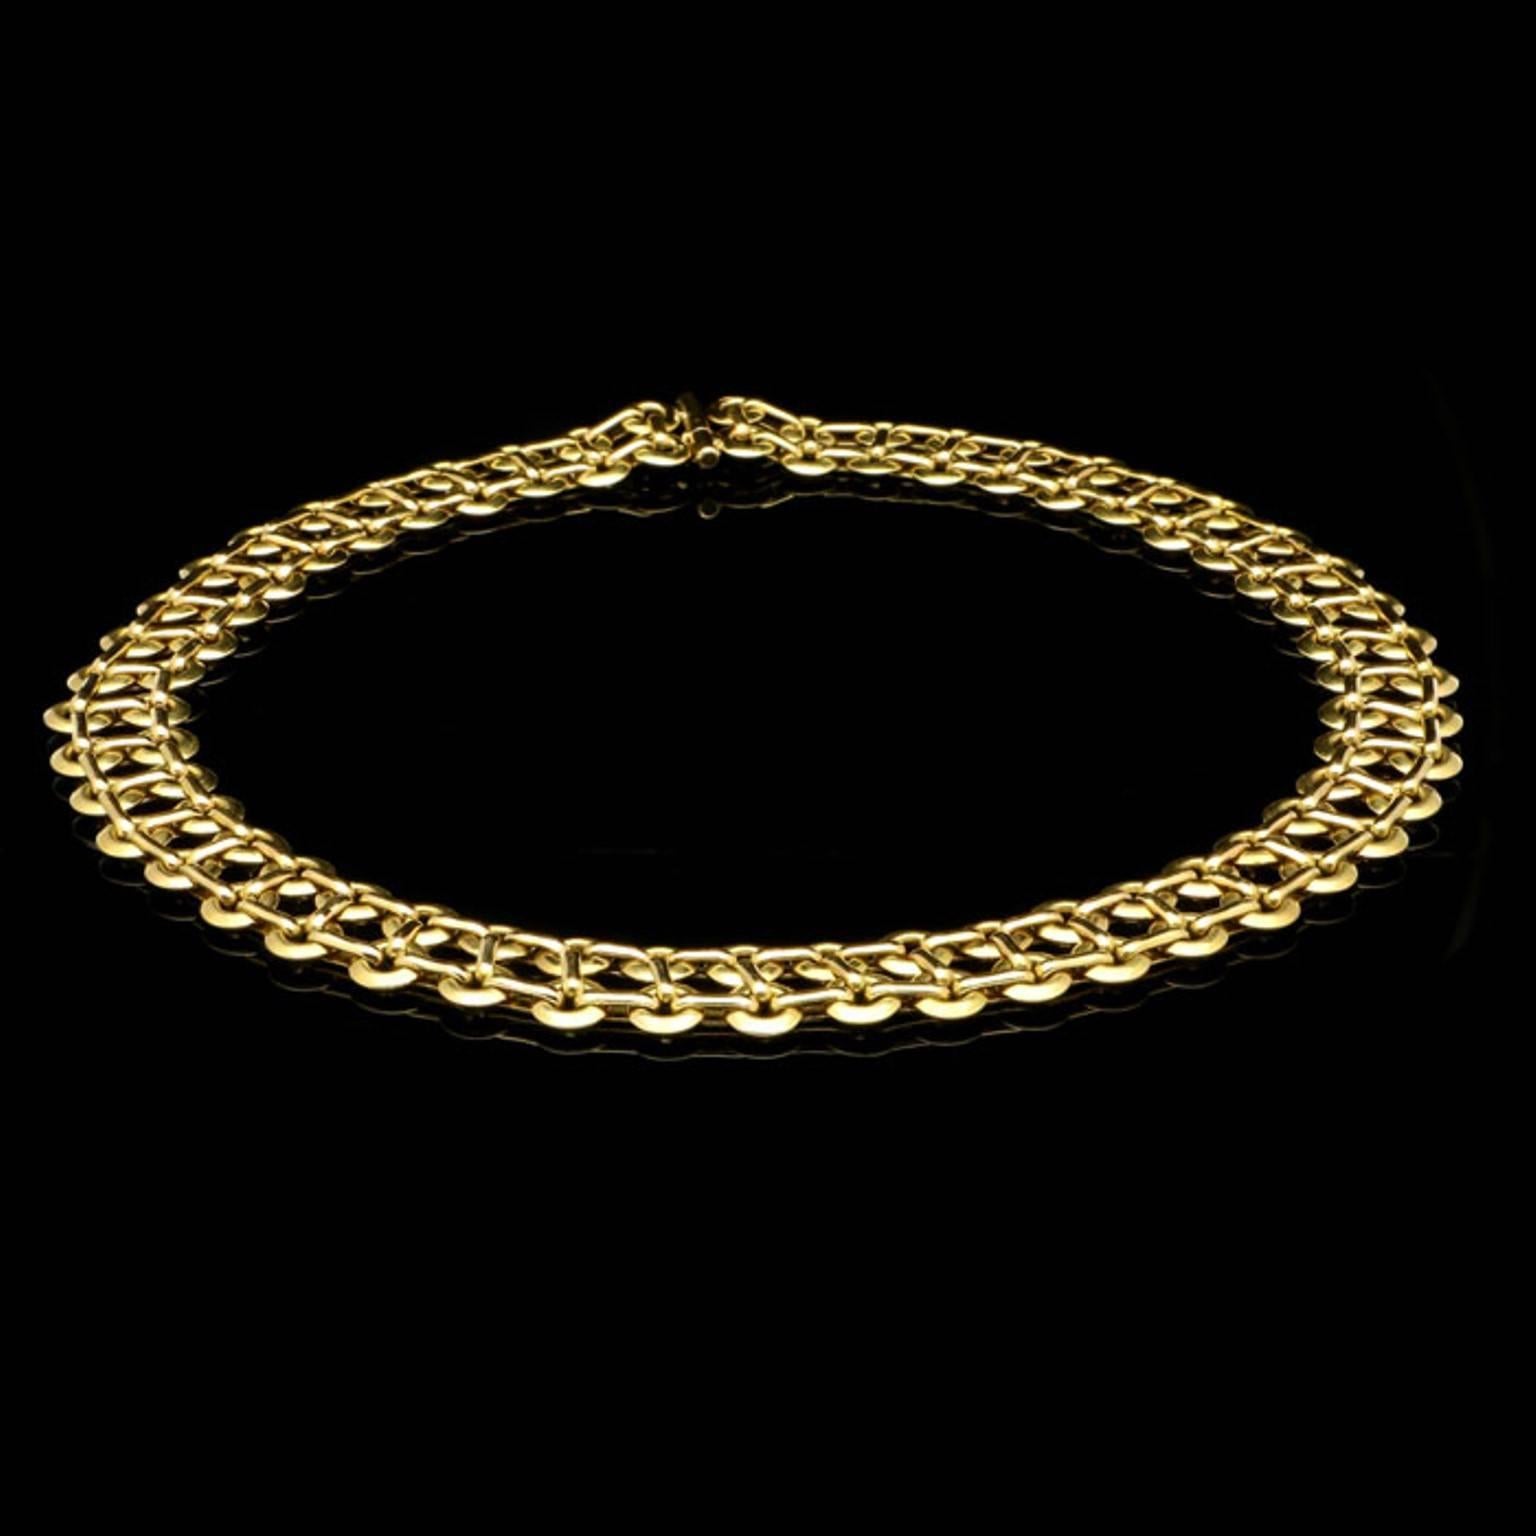 A gold double row circlet link necklace by Georges Lenfant, c.1960s, the highly articulated necklace in 18ct yellow gold designed as two rows of small open circlets joined together by three oval links forming a continuous very flexible piece with a